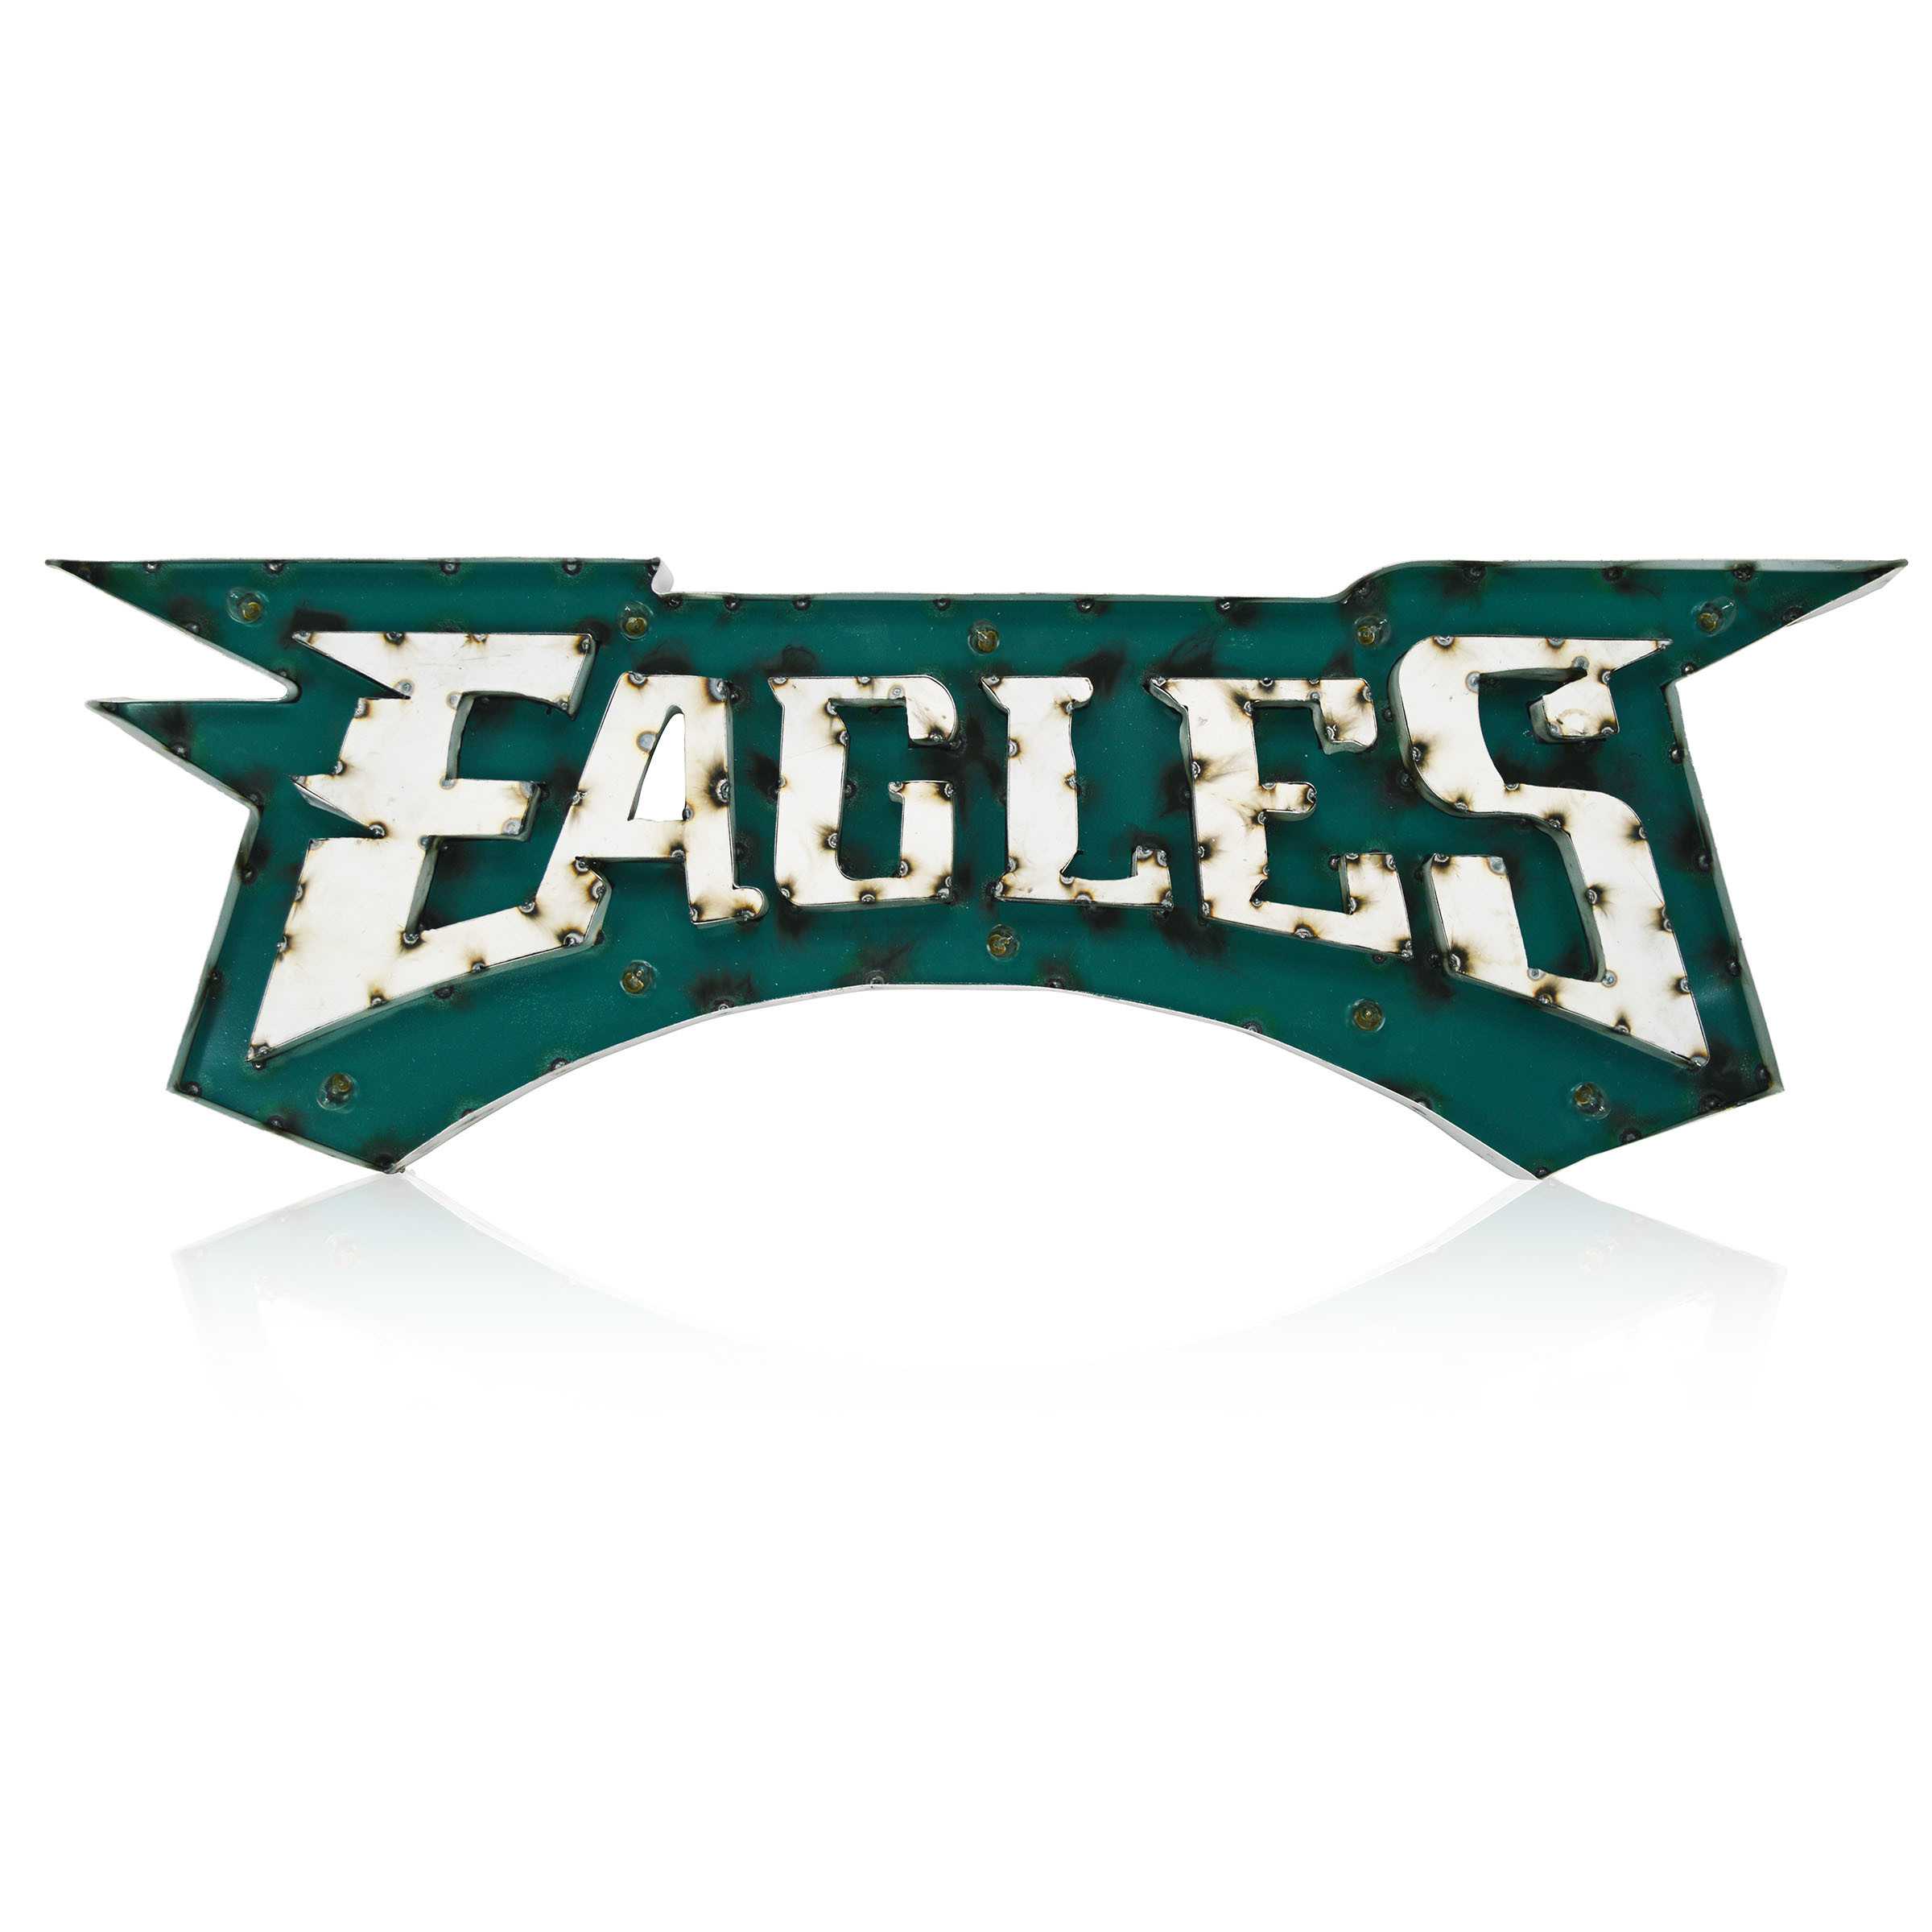 Philadelphia Eagles Lighted Recycled Metal Sign